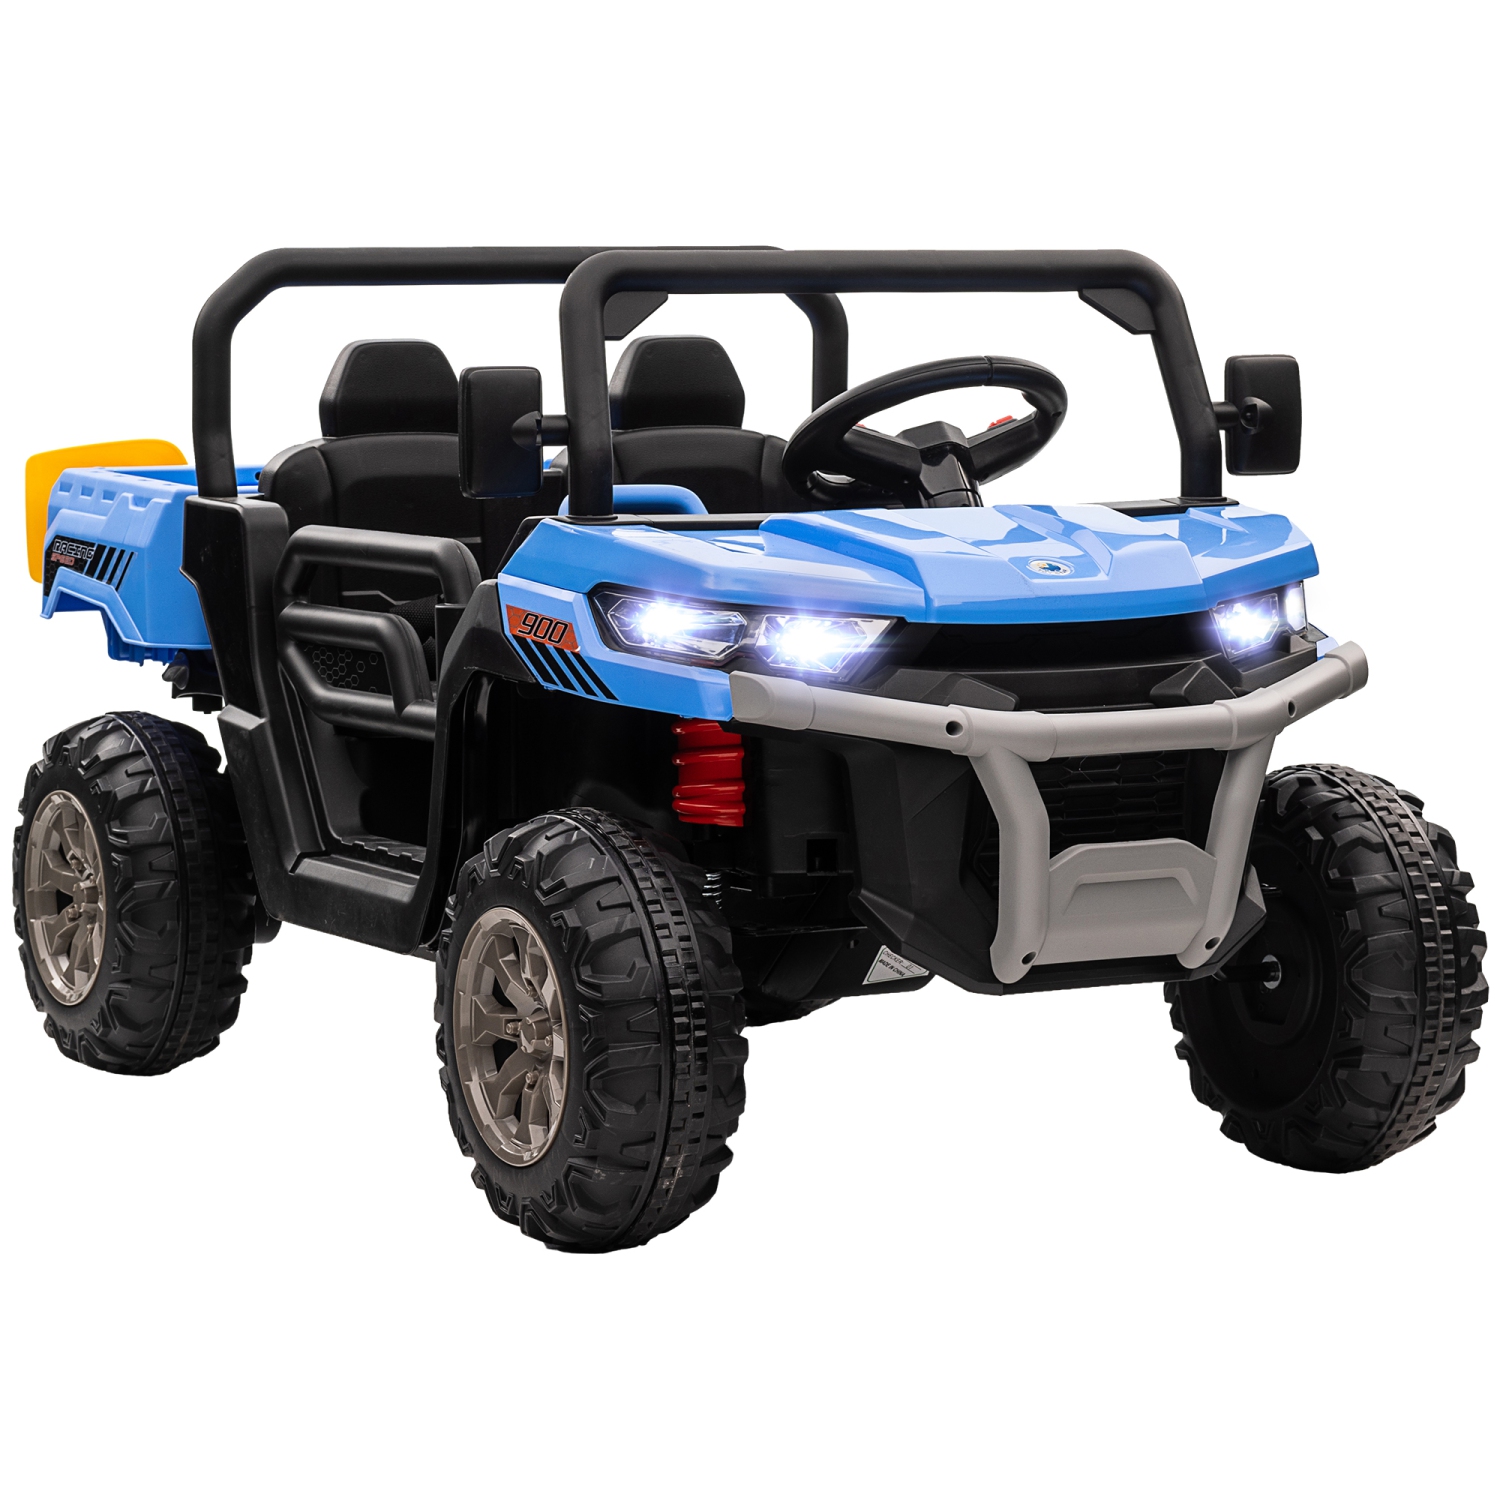 Aosom 12V Ride on Car with Electric Bucket, Two-Seater Battery-Powered Cars for Kids with Shovel, Remote Control, Spring Suspension, Horn, Music, Blue